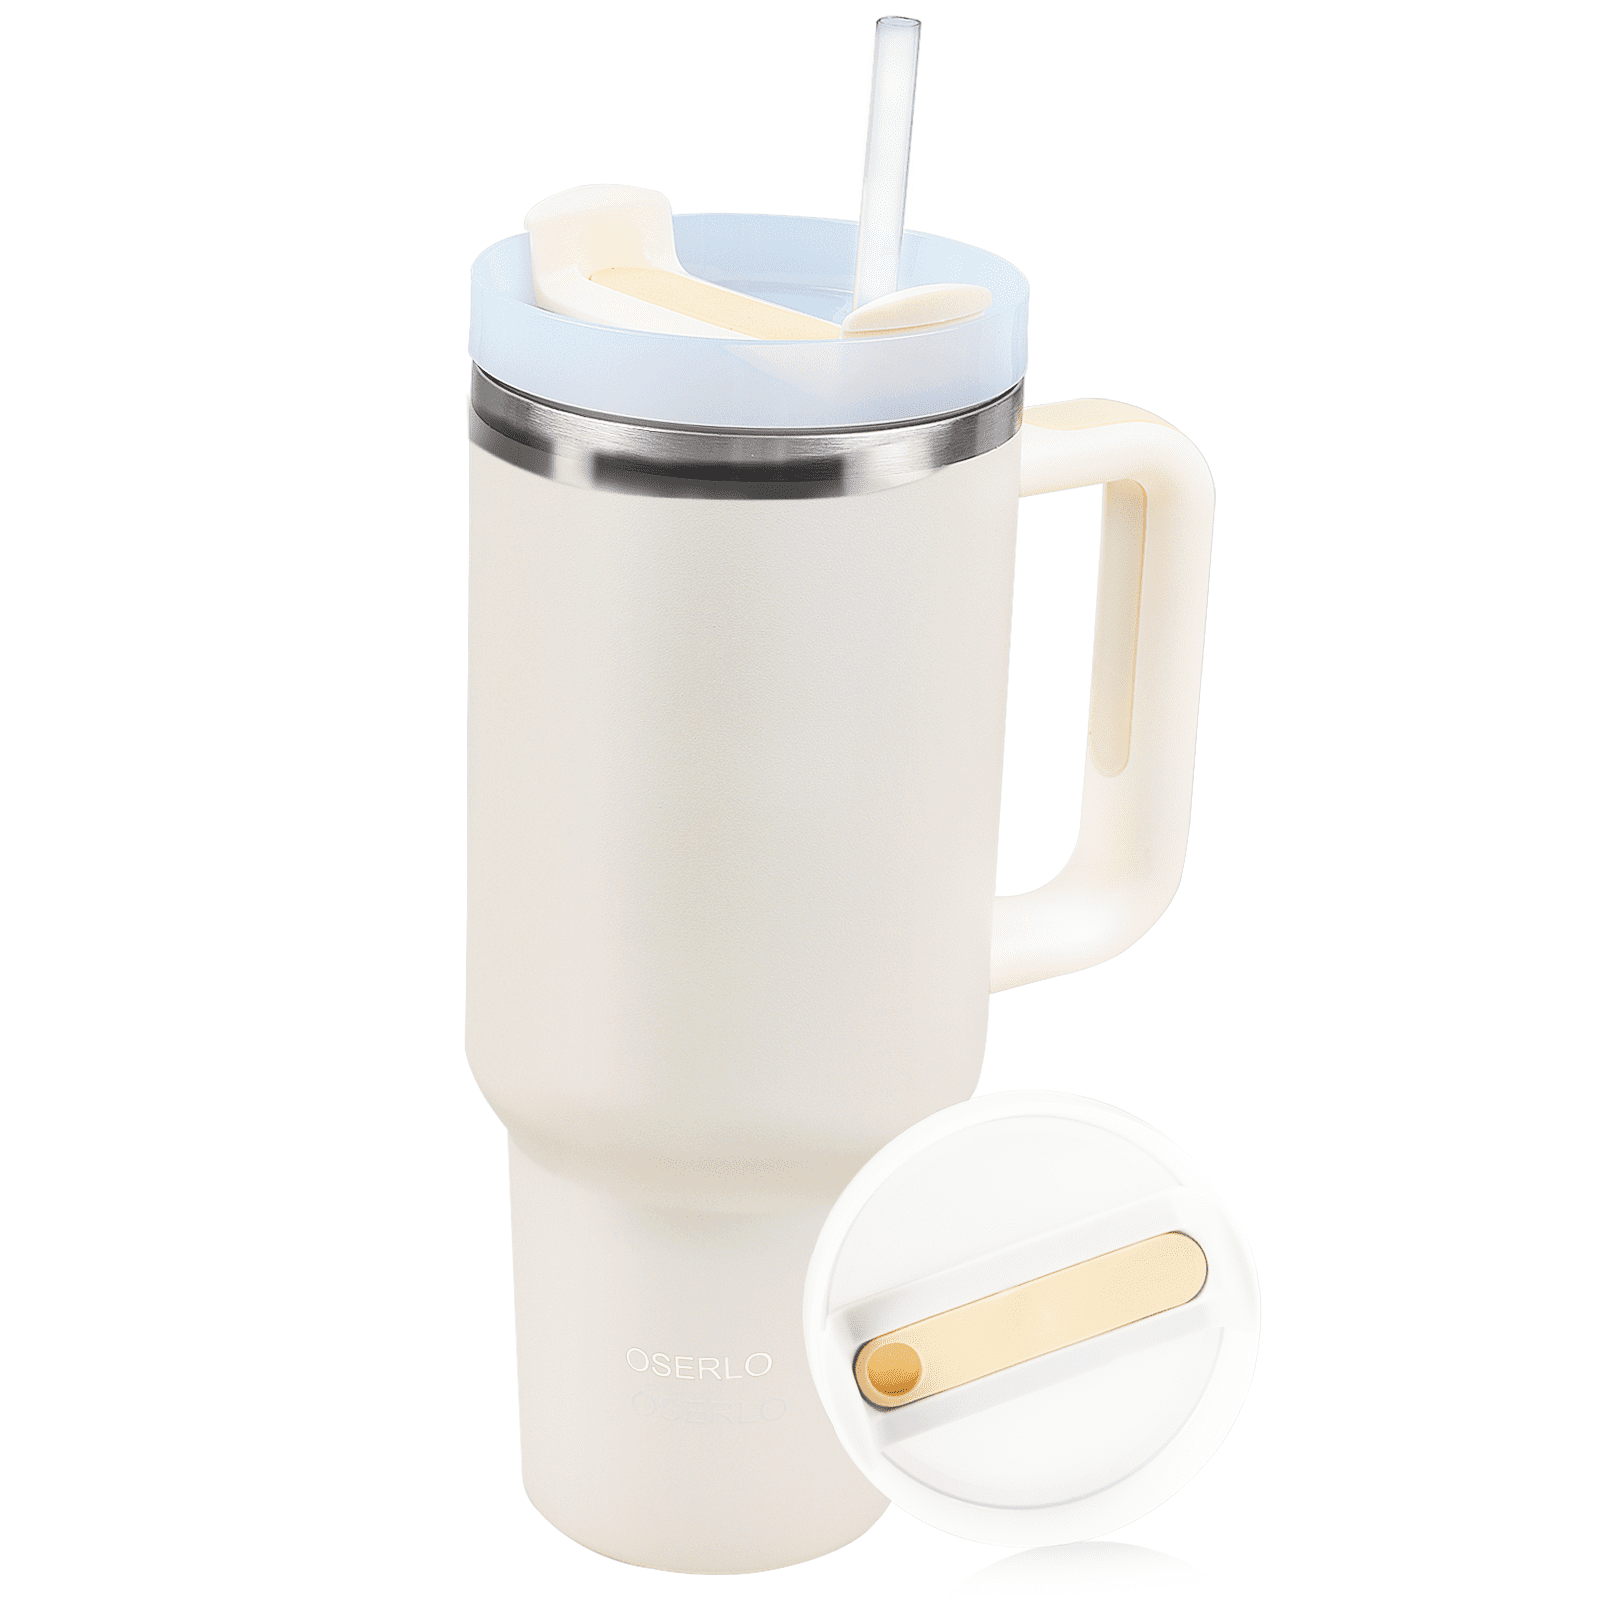 JOZELNK 40oz Tumbler with Handle, Insulated Big Mug wtih Straw and Lid,  Stainless Steel Double Wall Vacuum Iced Coffee Cup (Cream)